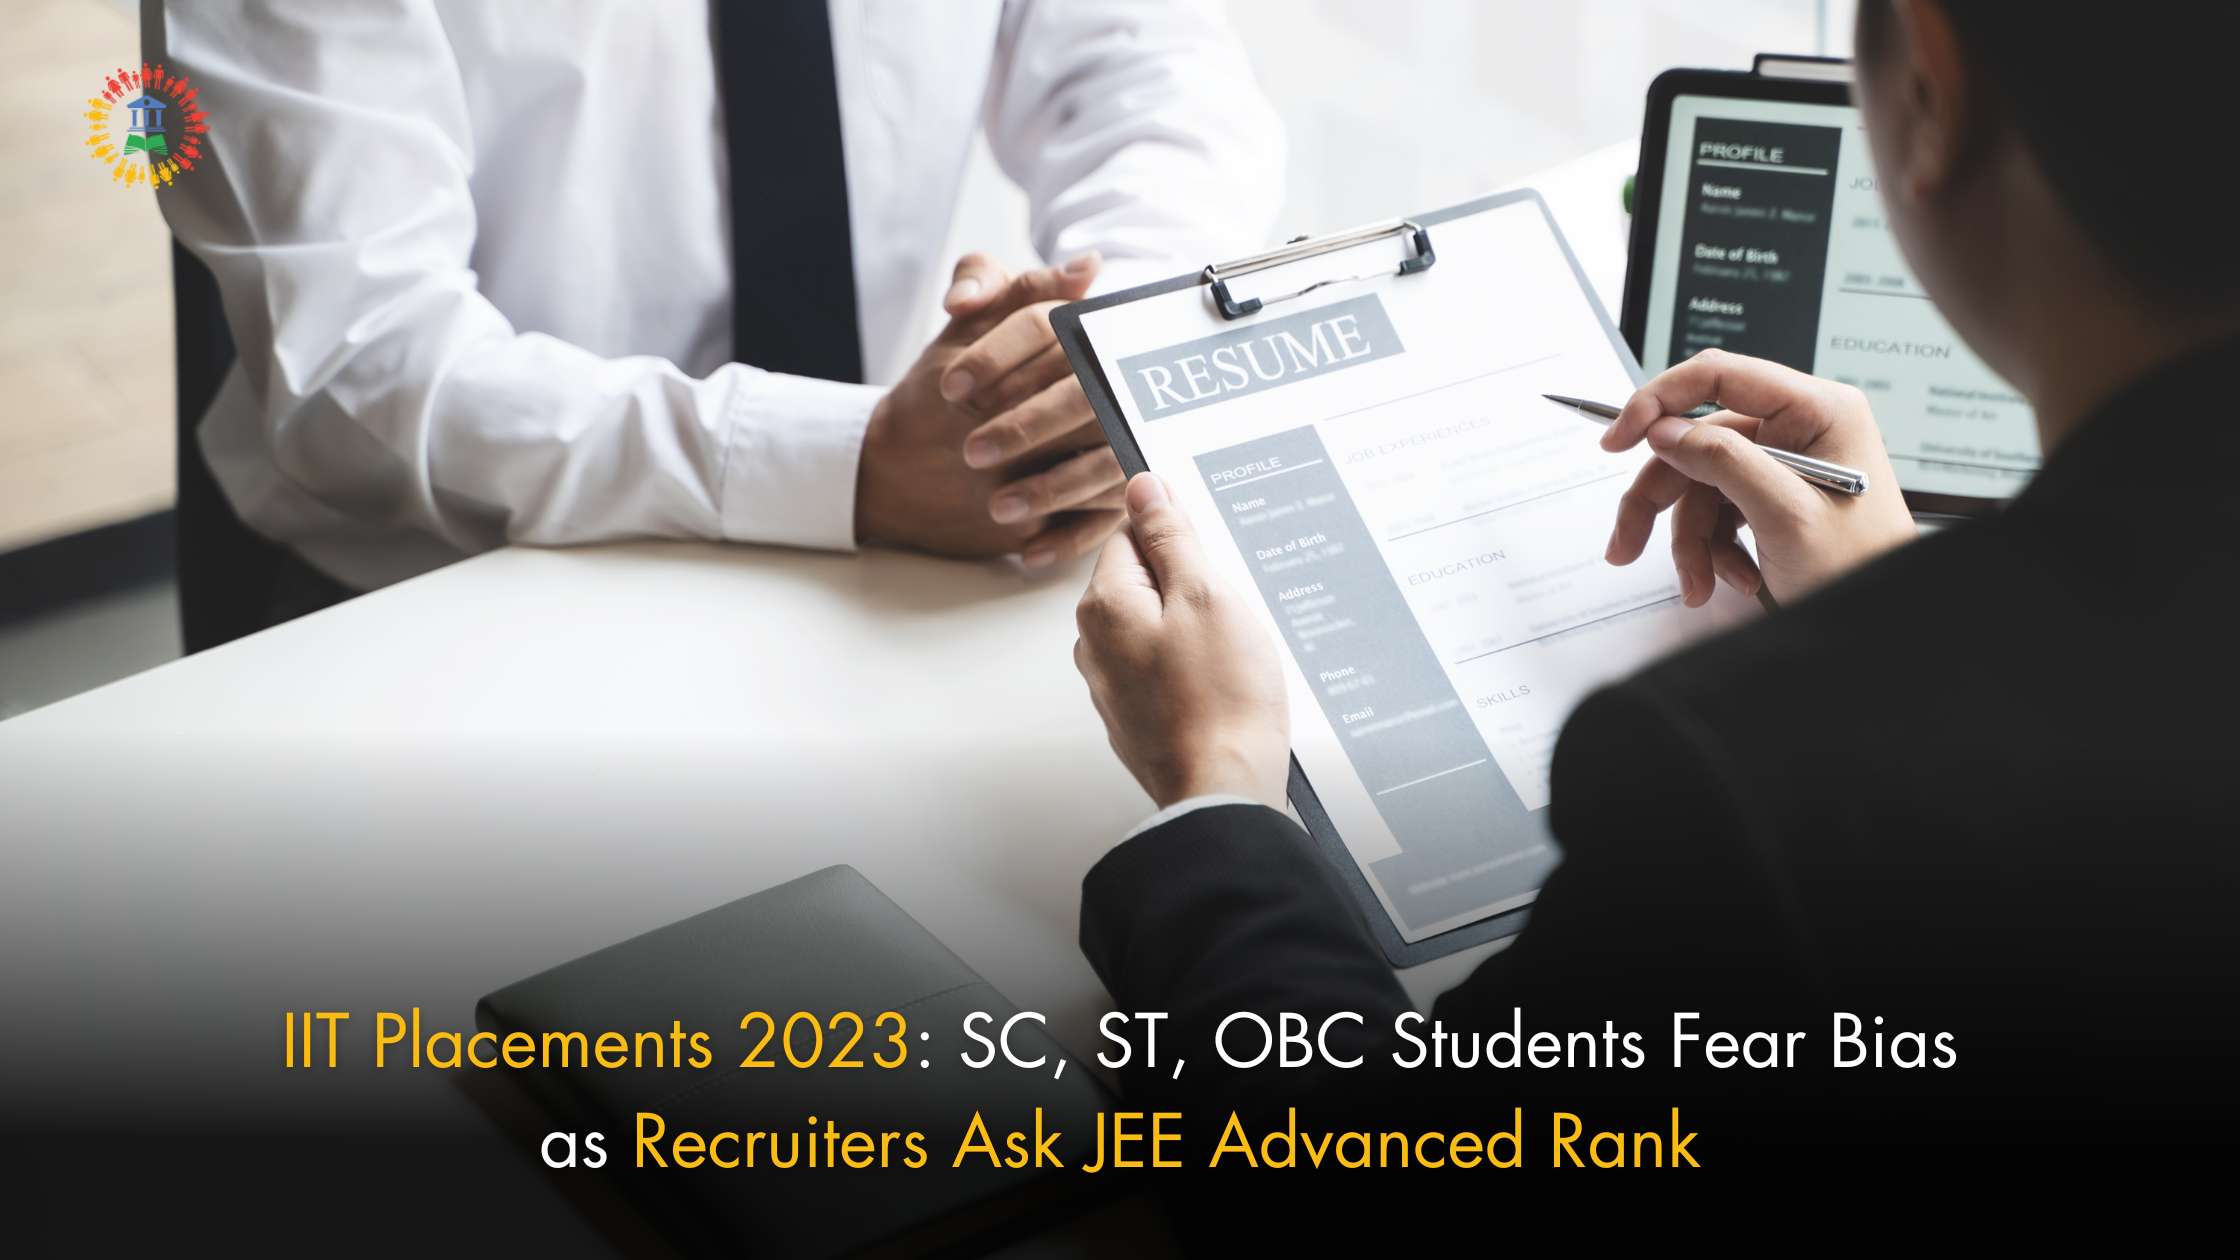 IIT Placements 2023: SC, ST, OBC Students Fear Bias as Recruiters Ask JEE Advanced Rank